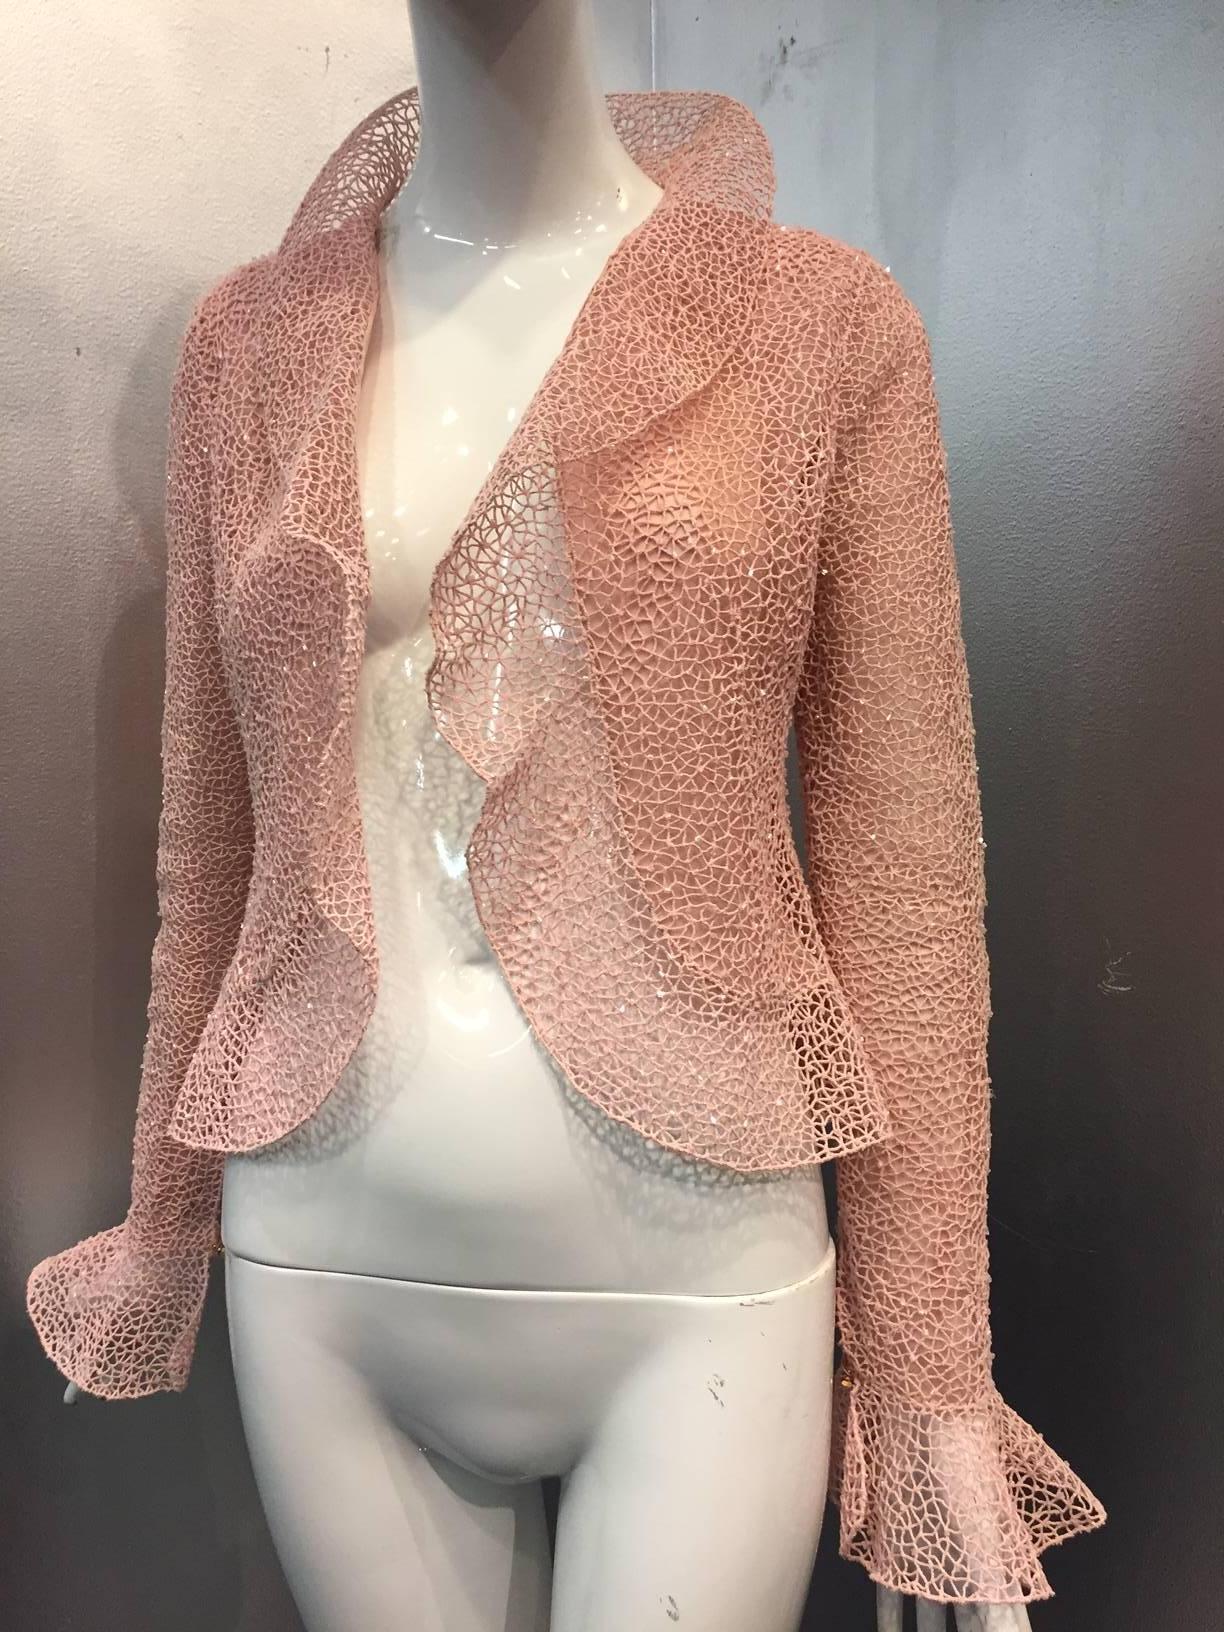 Women's Oscar de La Renta Pink Mesh Lace Cropped Jacket with Iridescent Scattered Beads